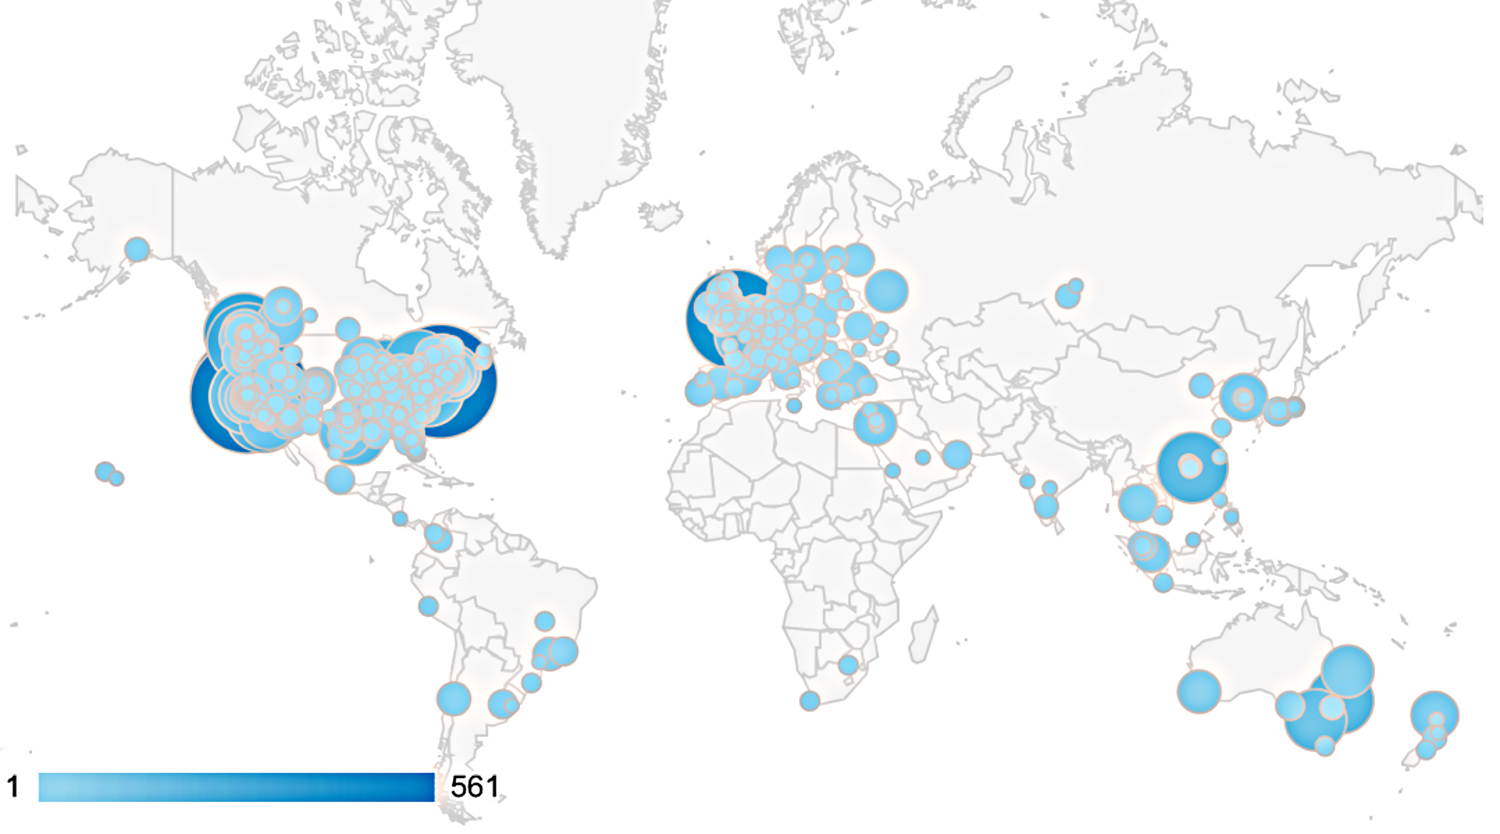 Geographic locations of page views of the Kickstarter campaign for kittybiome from Google Analytics. The colors and bubble sizes represent numbers of sessions out of a total of 20,997 page views. New users account for 82.4% (17,304) of the page views. Geographic location was not determined for 4.6% of views.